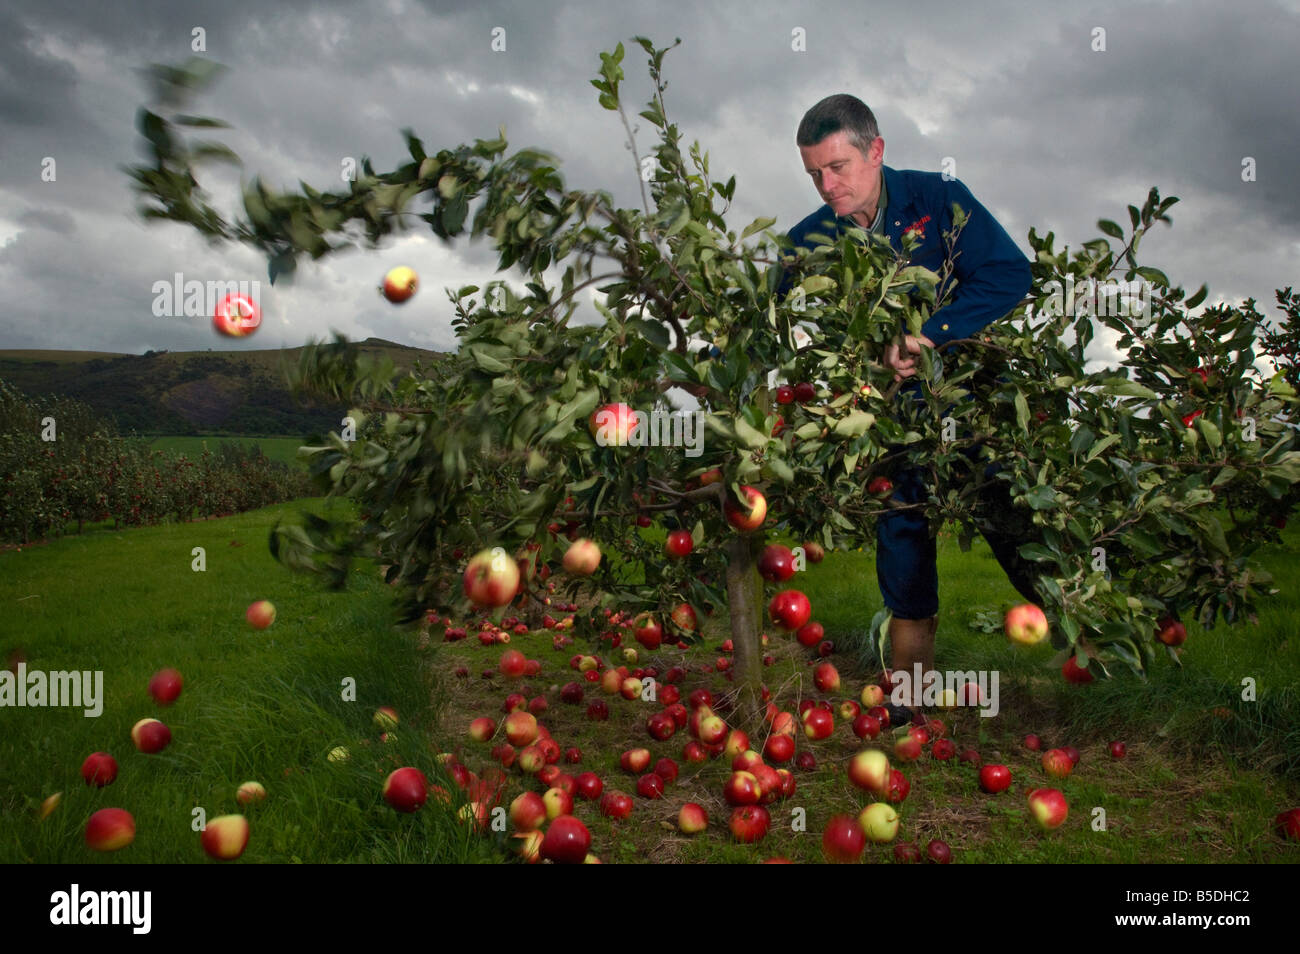 Harvesting Katy cider apples by shaking the tree Thatchers Cider Orchard Sandford Somerset England Stock Photo